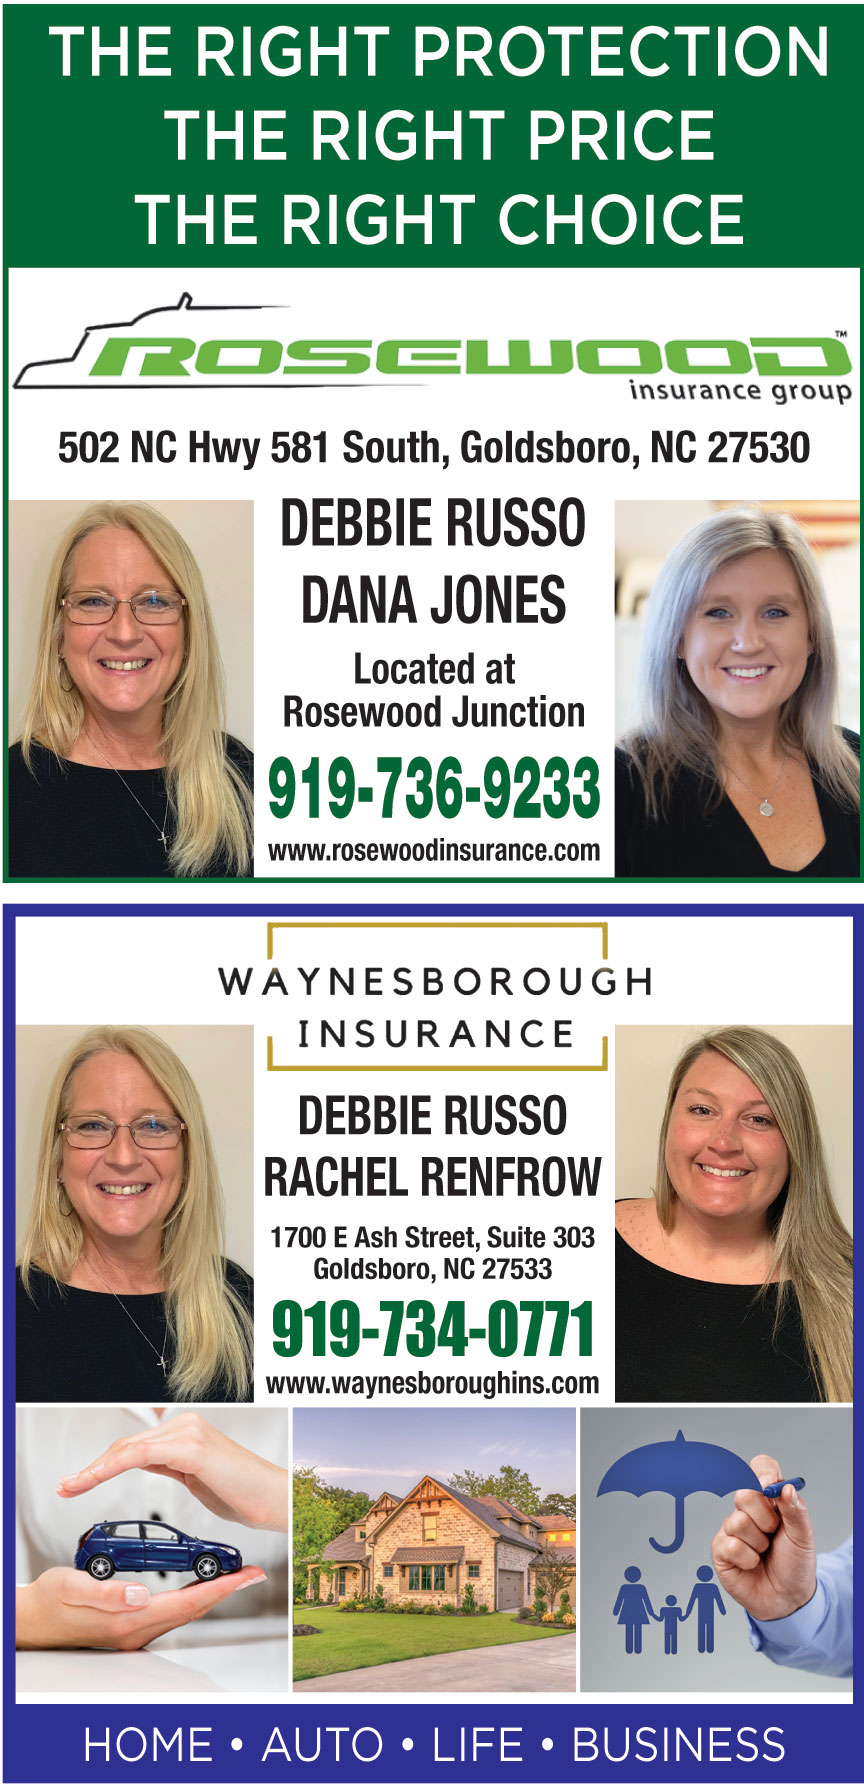 ROSEWOOD INSURANCE GROUP